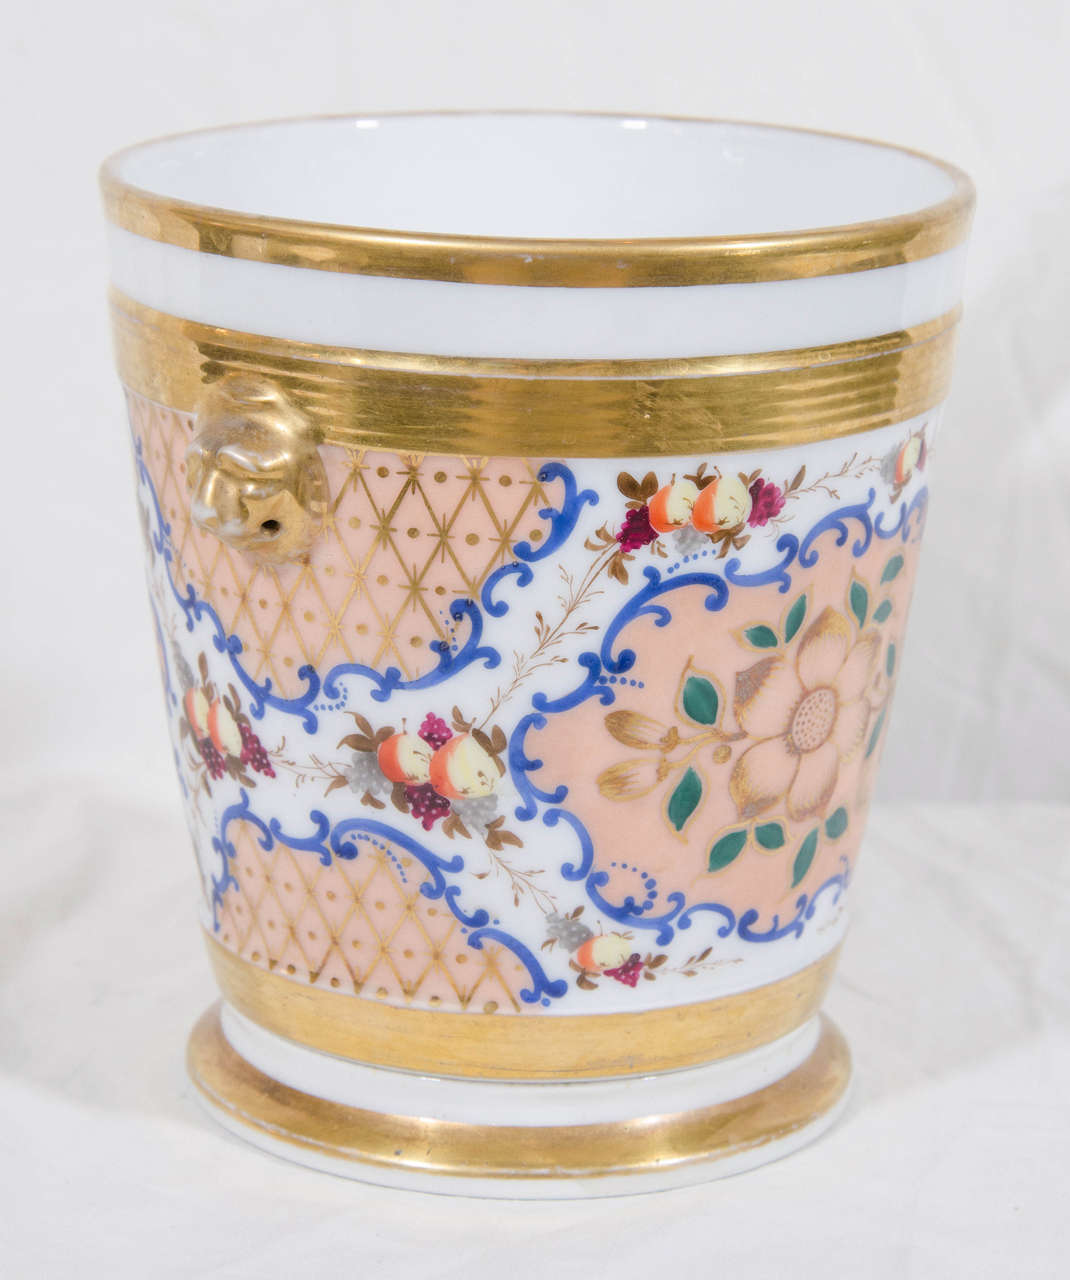 A pair of Paris porcelain cache pots and stands with a design of fruits and flowers painted in a variety of bright colors on a richly gilded peach ground.
On each side are gilded lion's head handles.